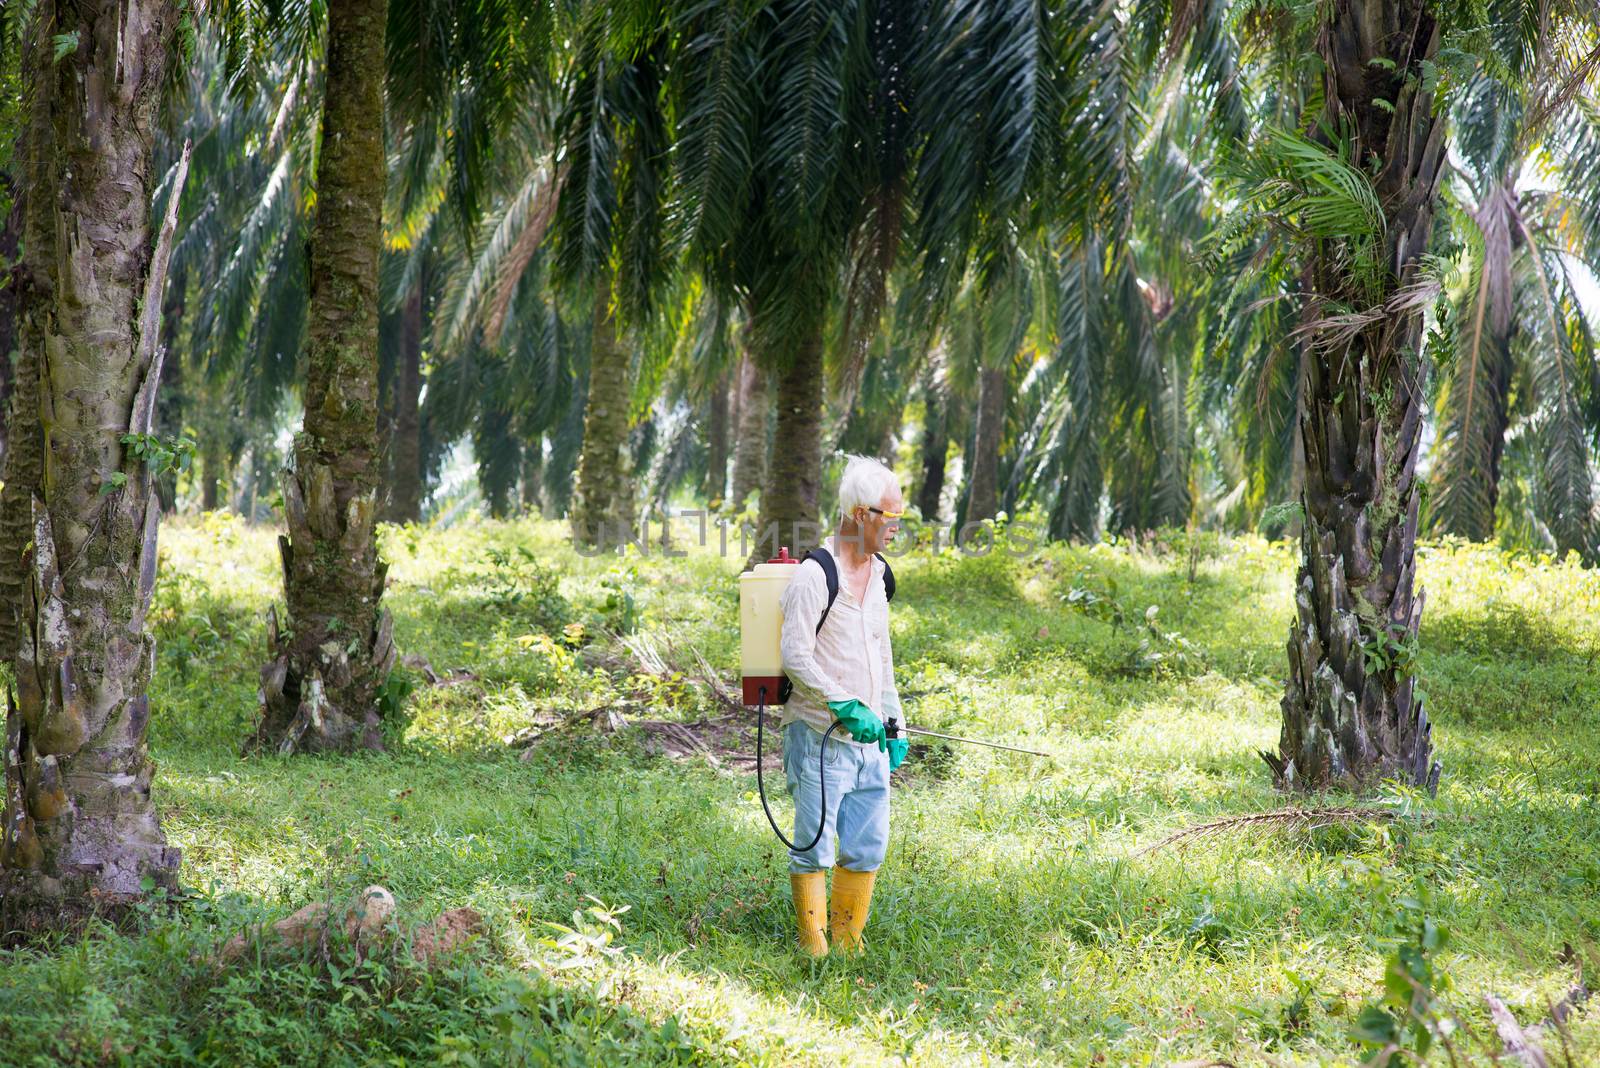 spraying herbicides at oil palm by szefei